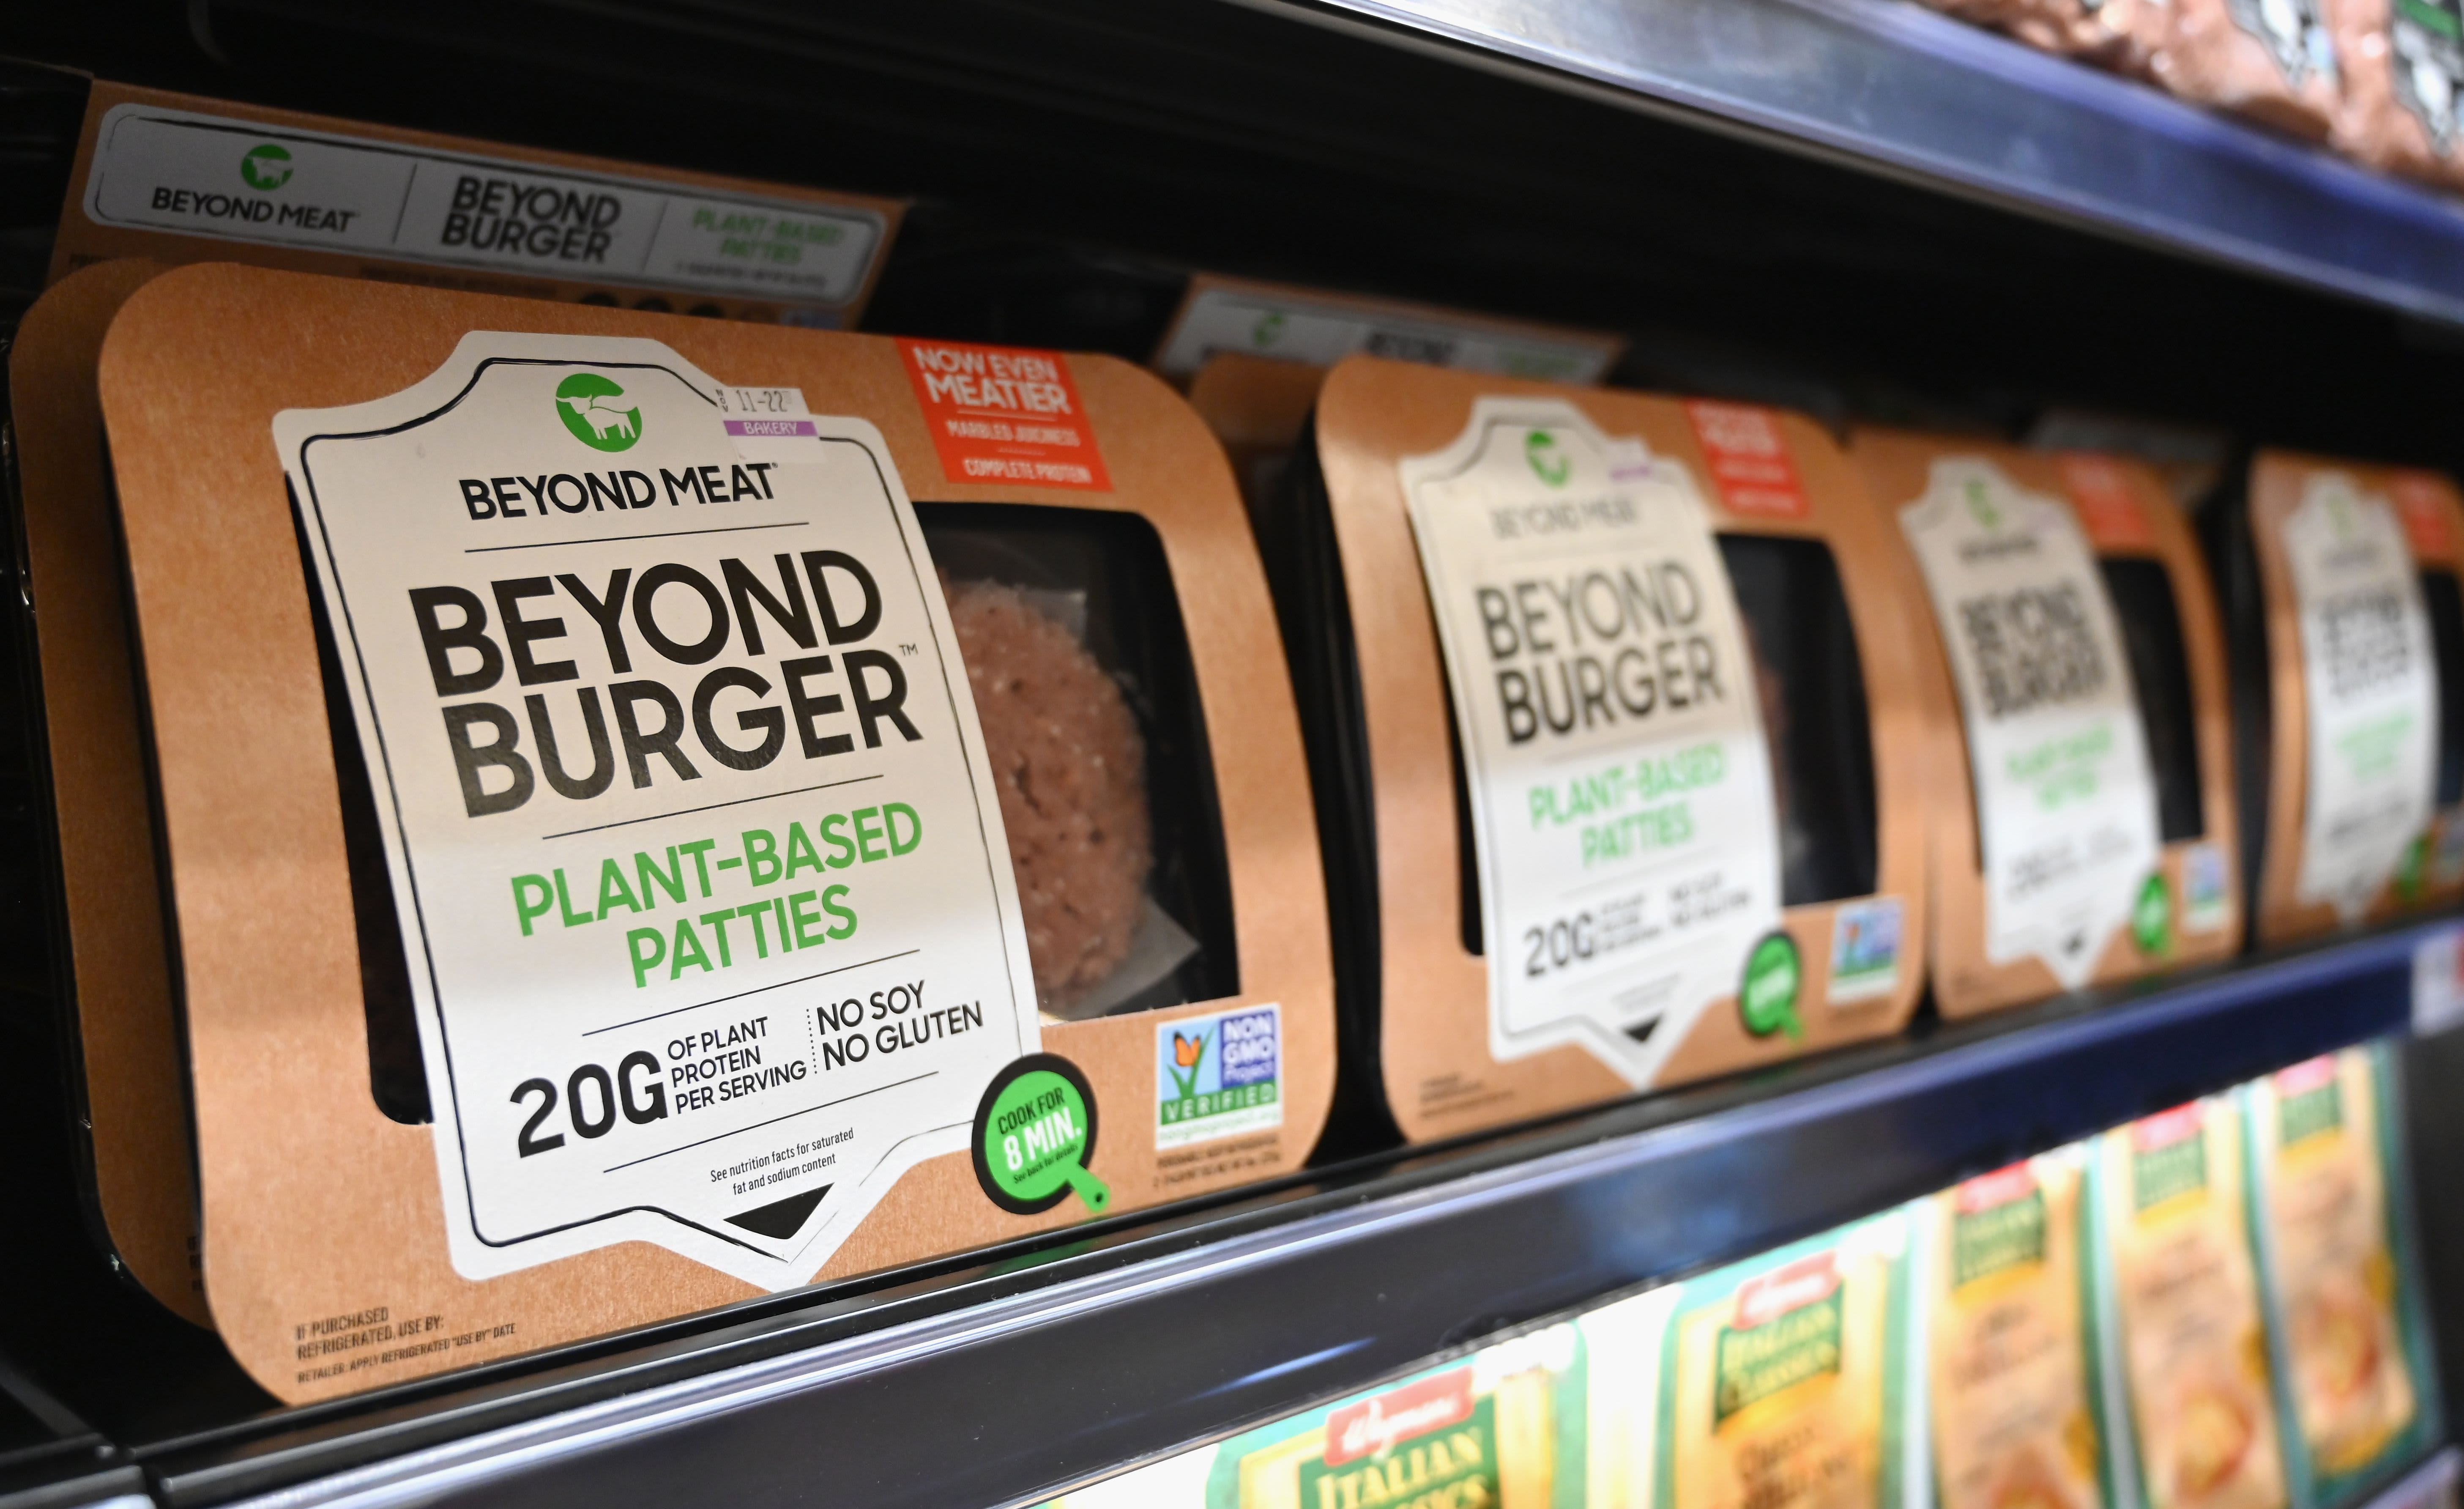 Beyond Meat Plant-Based Ground Beef, 1 lb, Beyond Meat